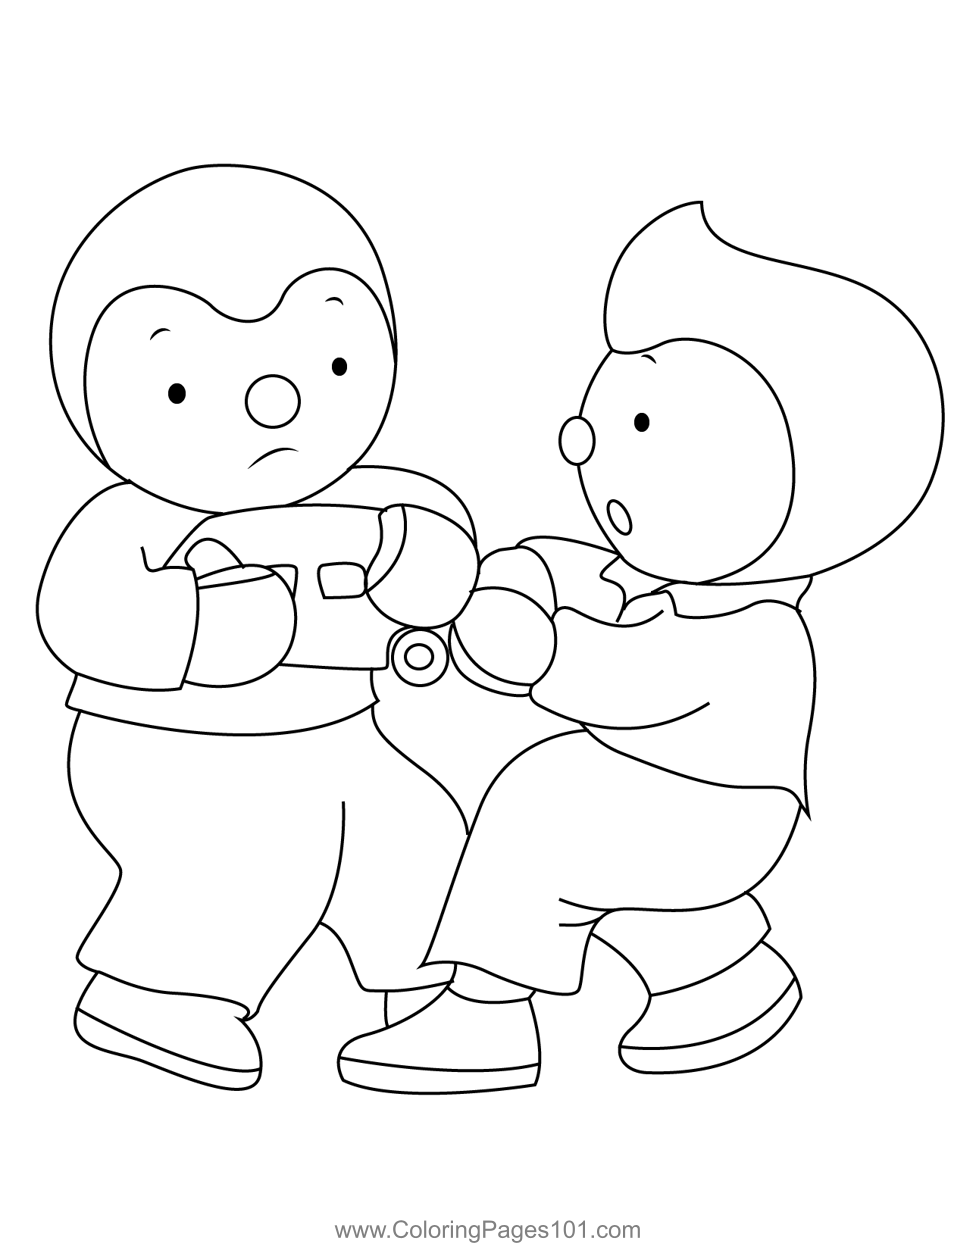 Charley And His Friend Fighting Coloring Page for Kids - Free Charley ...